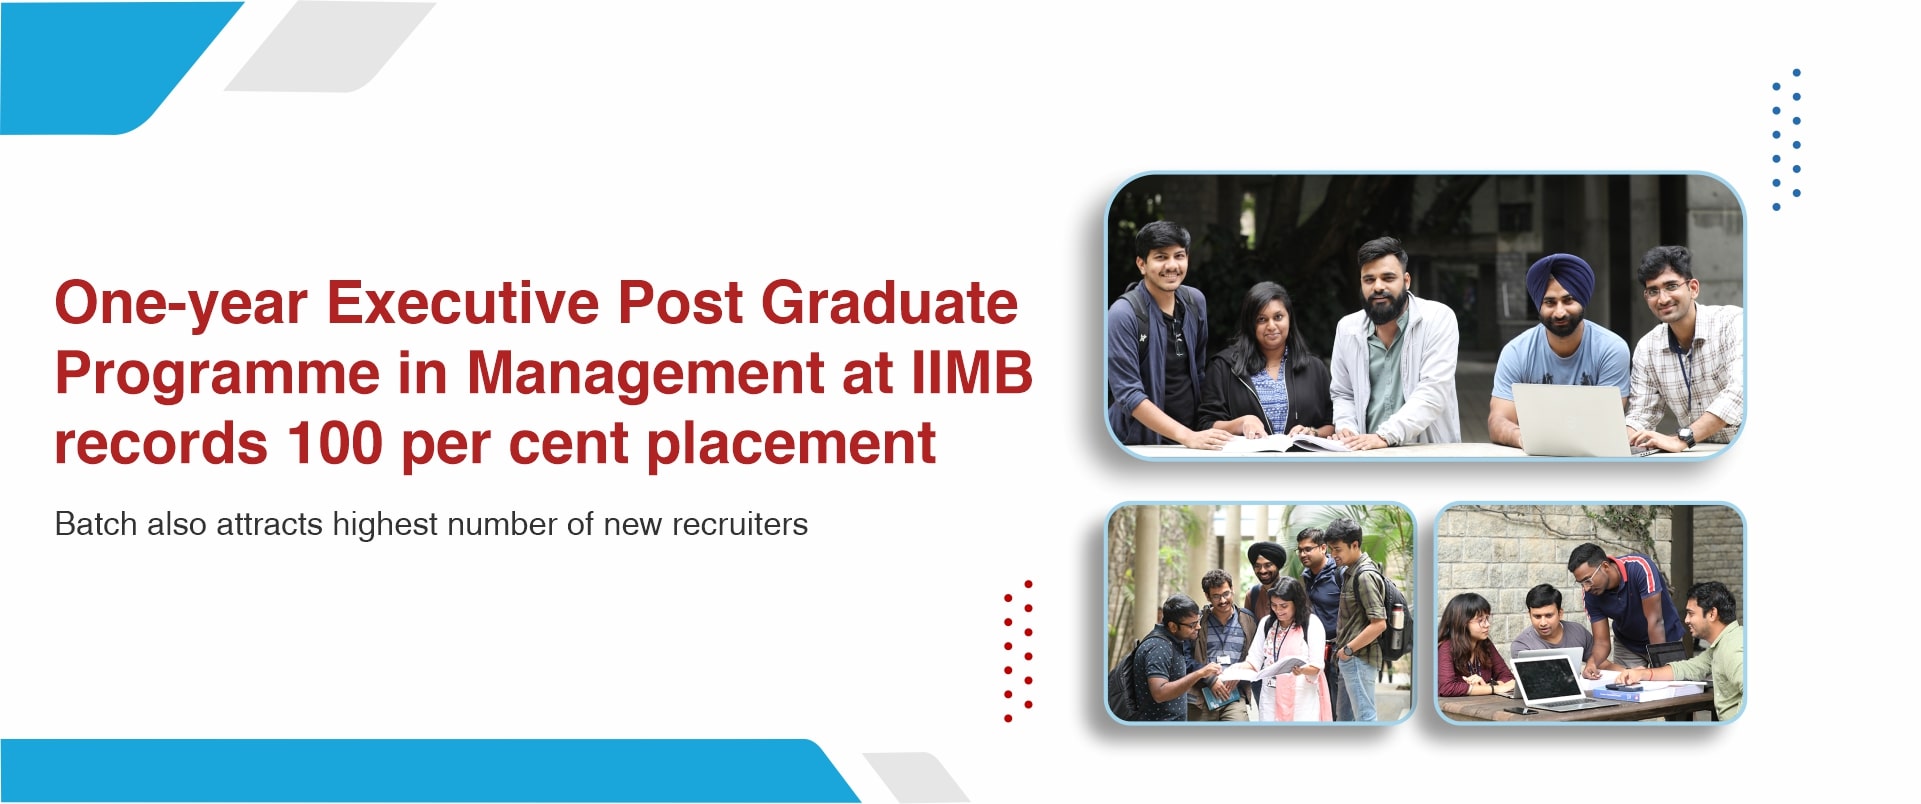 One-year Executive Post Graduate Programme in Management at IIMB records 100 per cent placement